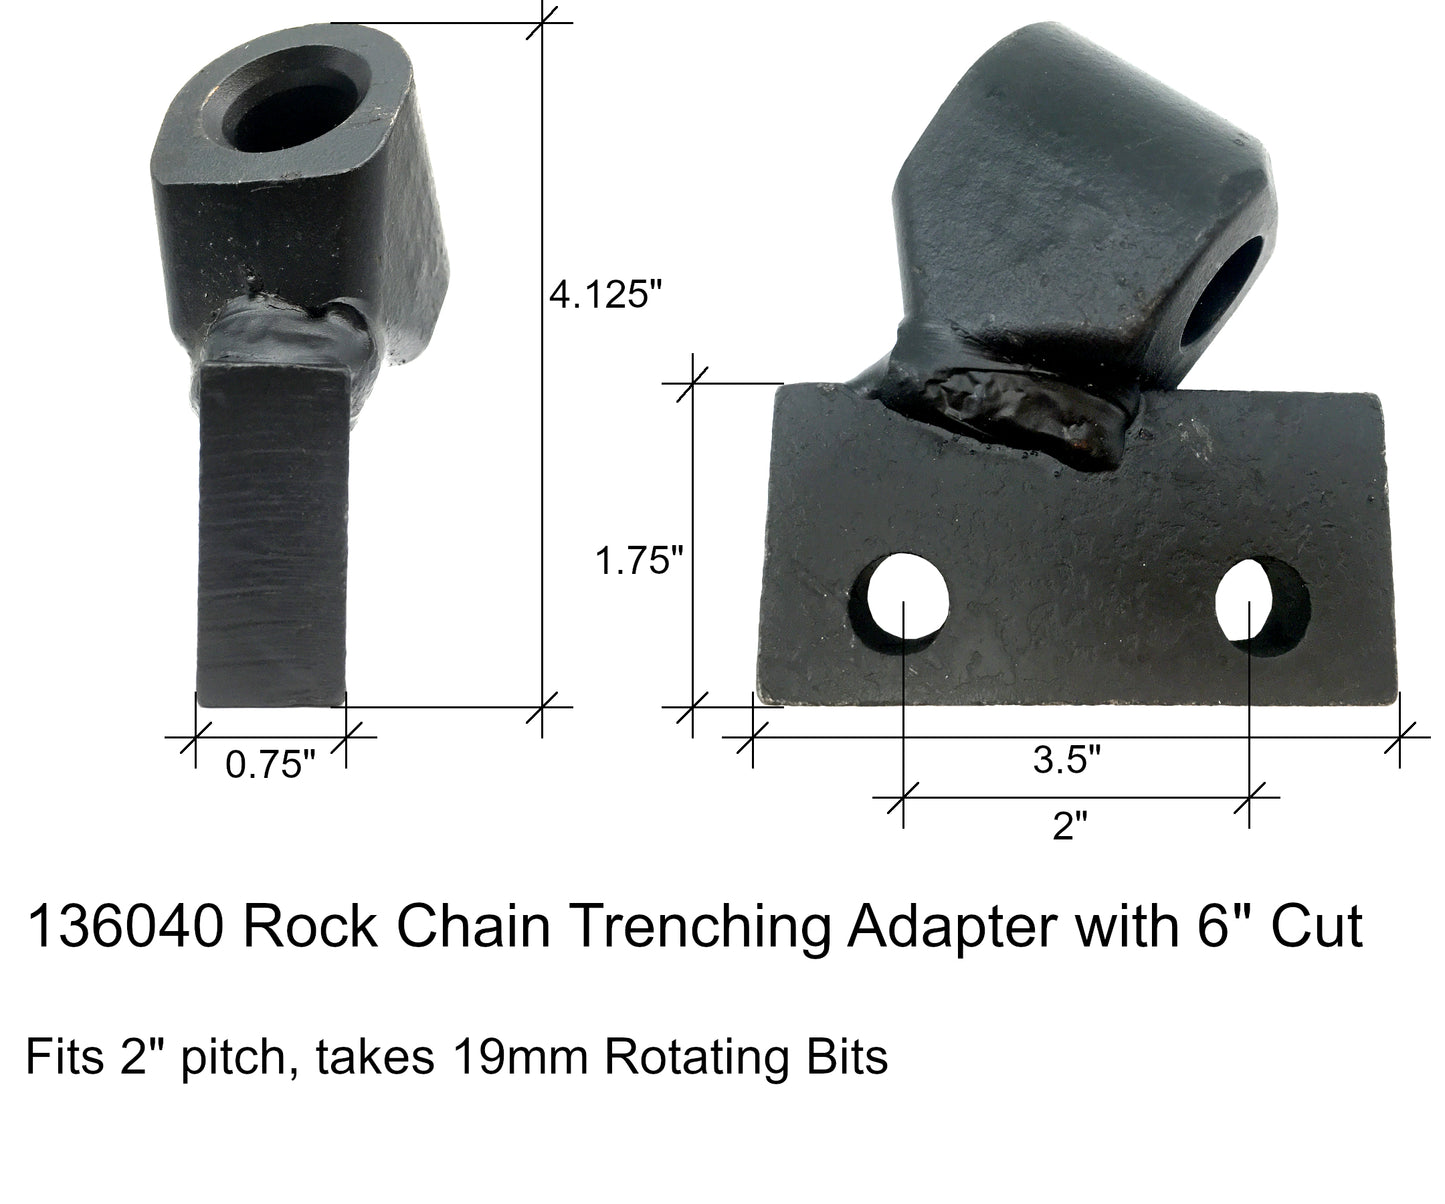 LH & RH Rock Chain Trenching Adapters - 136040 & 136041 - 2" Pitch, 6" Cut, 19mm Condition: New